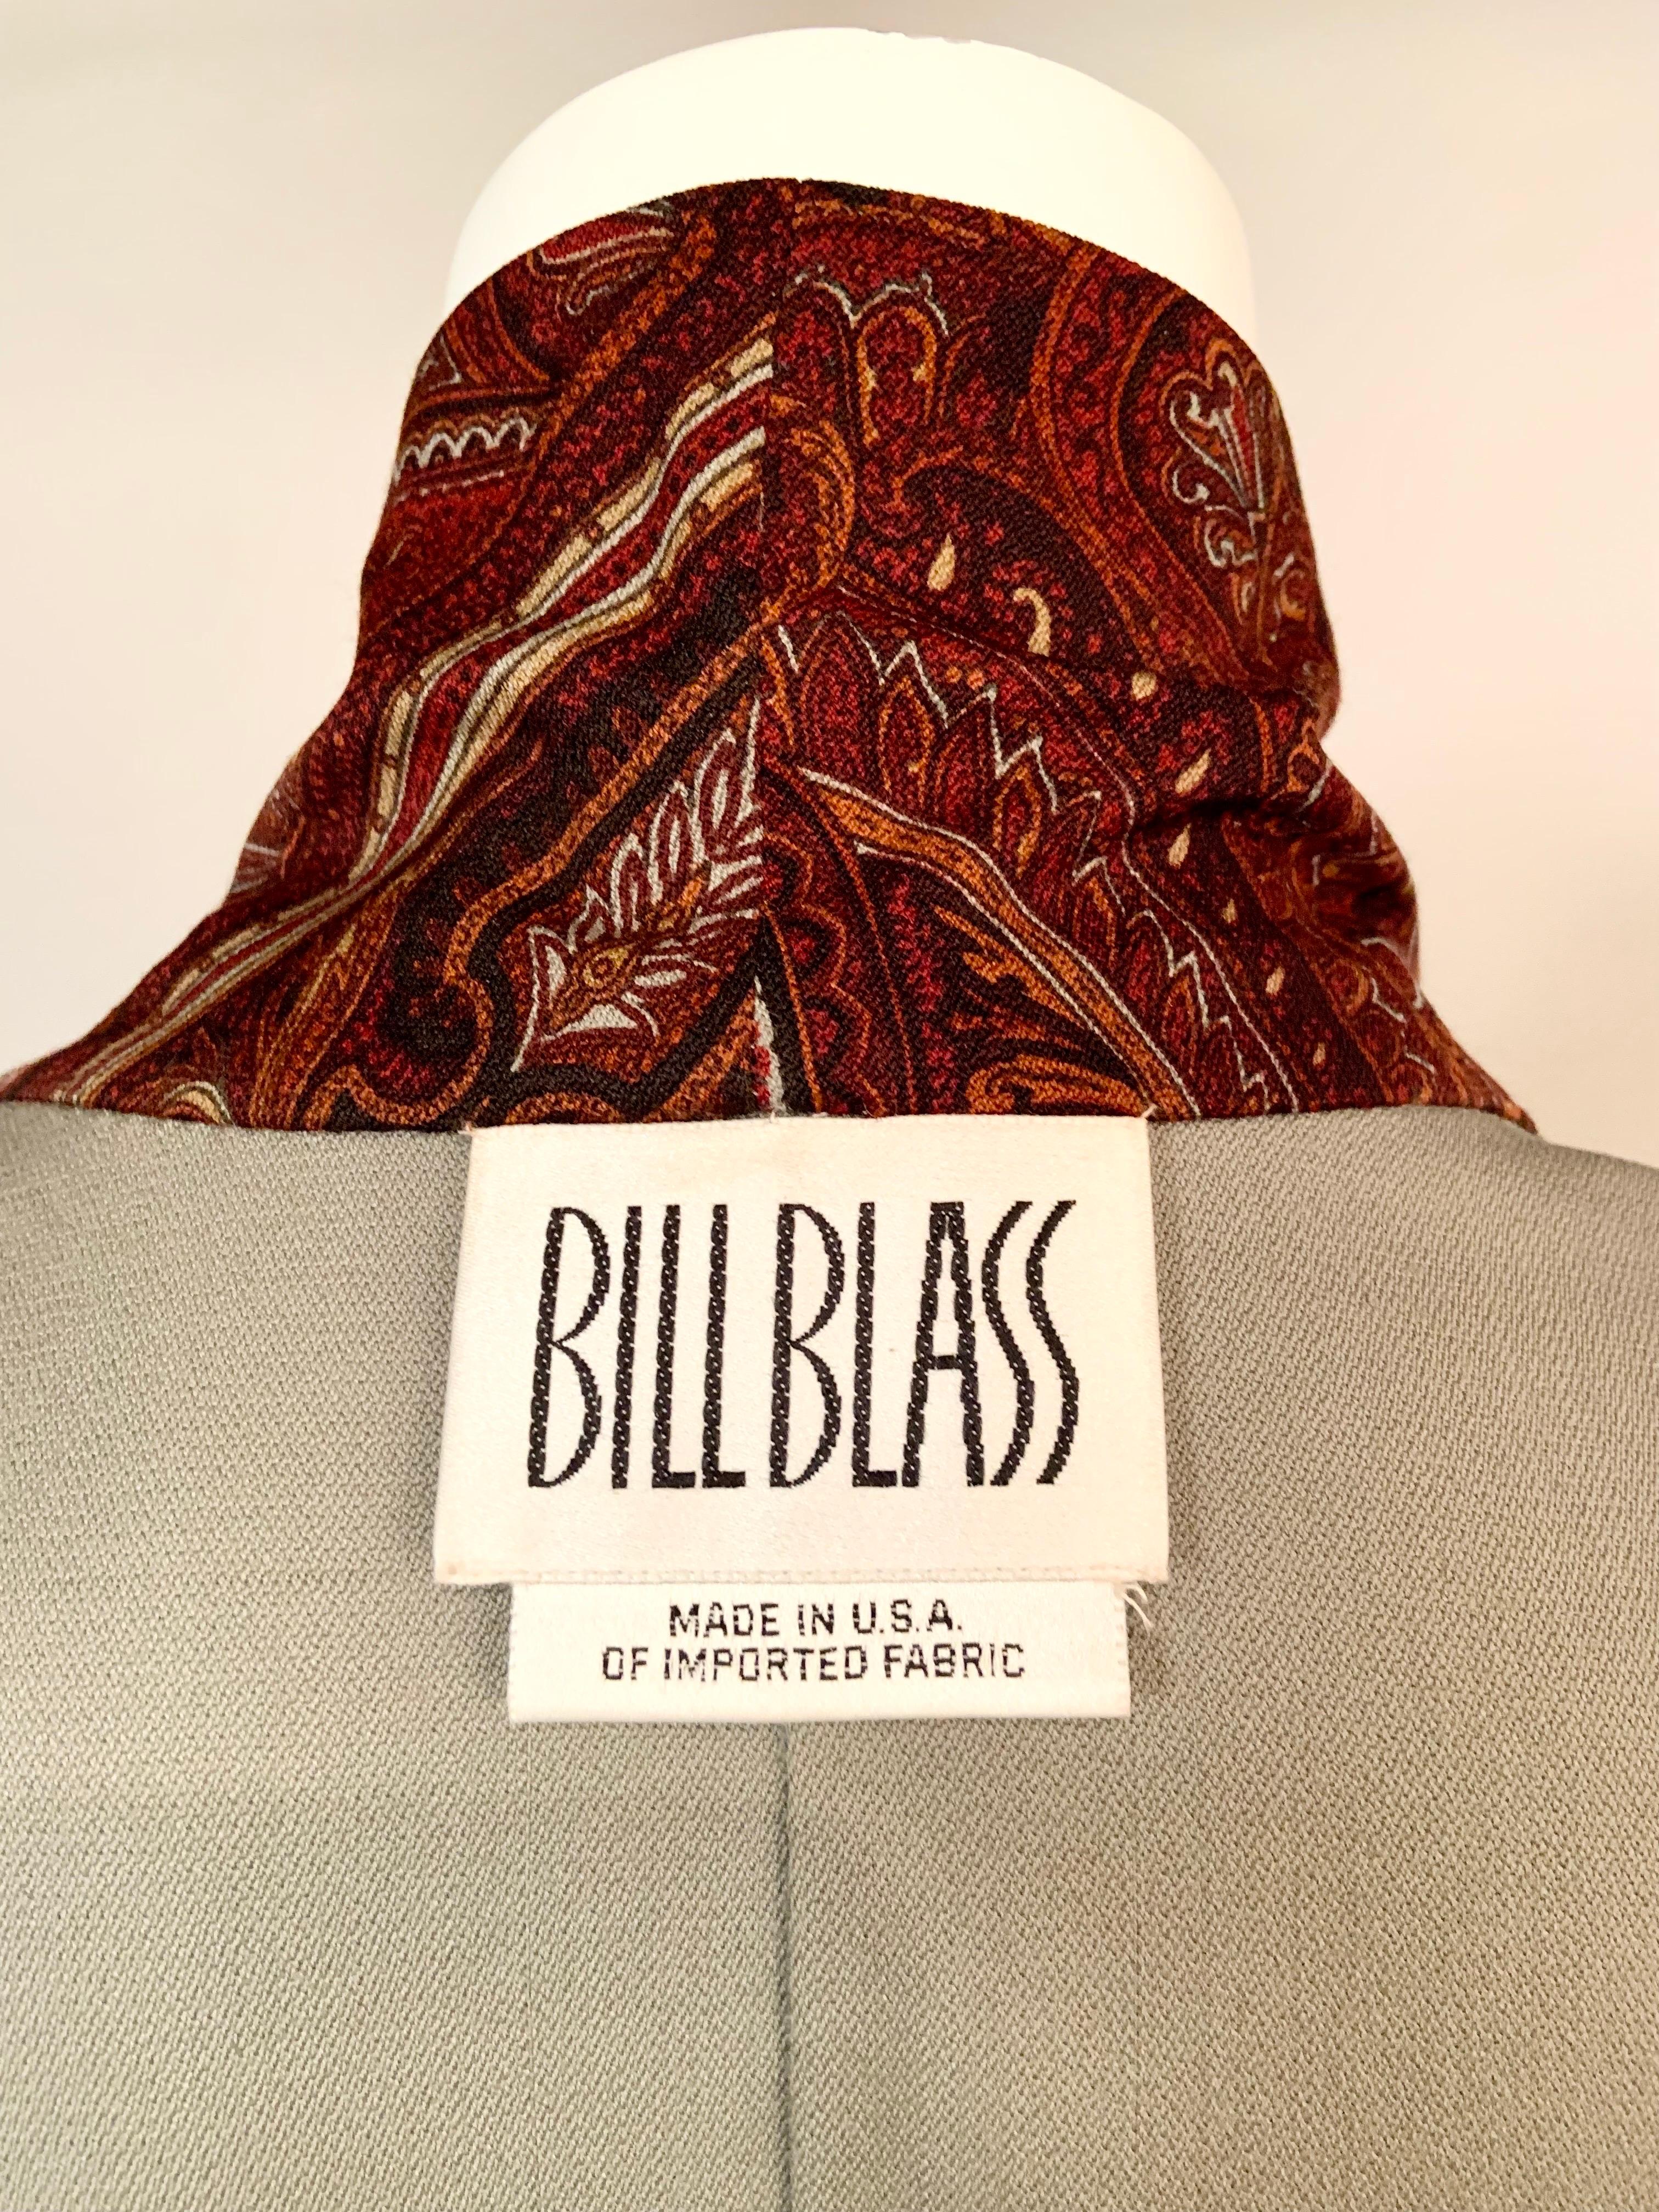 Bill Blass Paisley Patterned Coat in a Larger Size For Sale 6